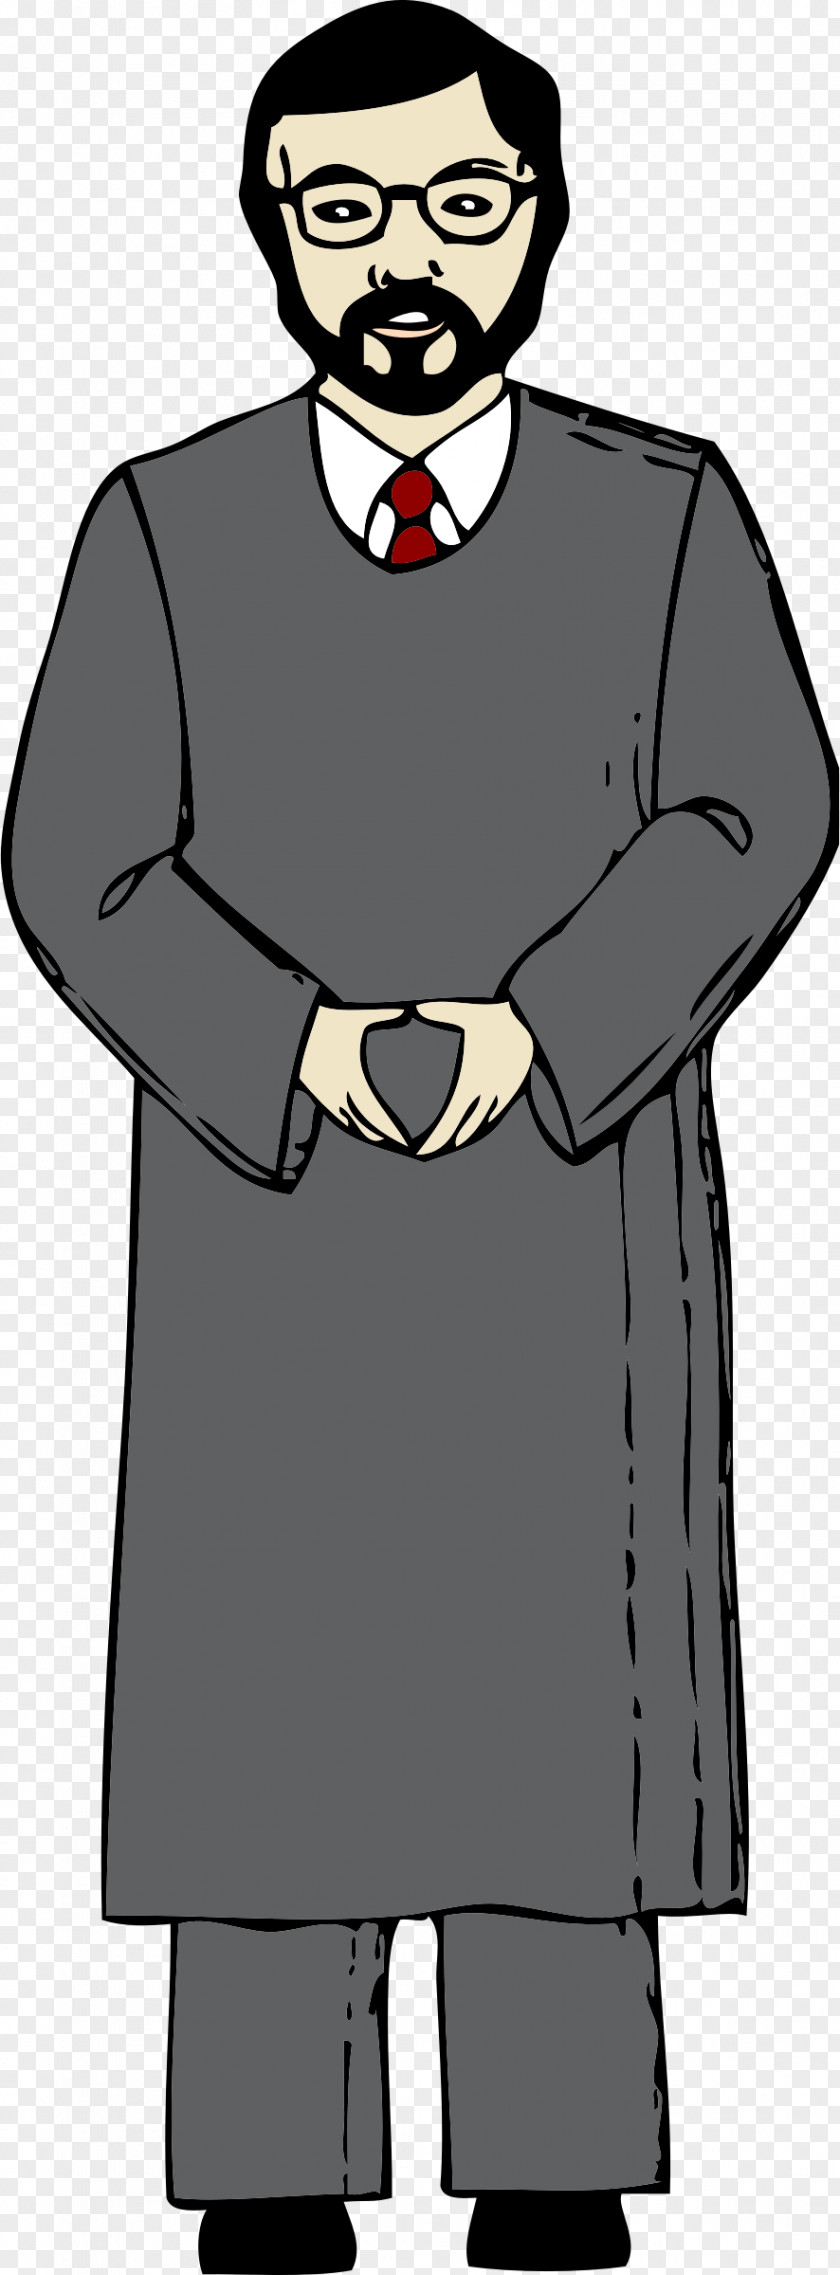 OLD MAN Lance Ito Judge Lawyer Clip Art PNG